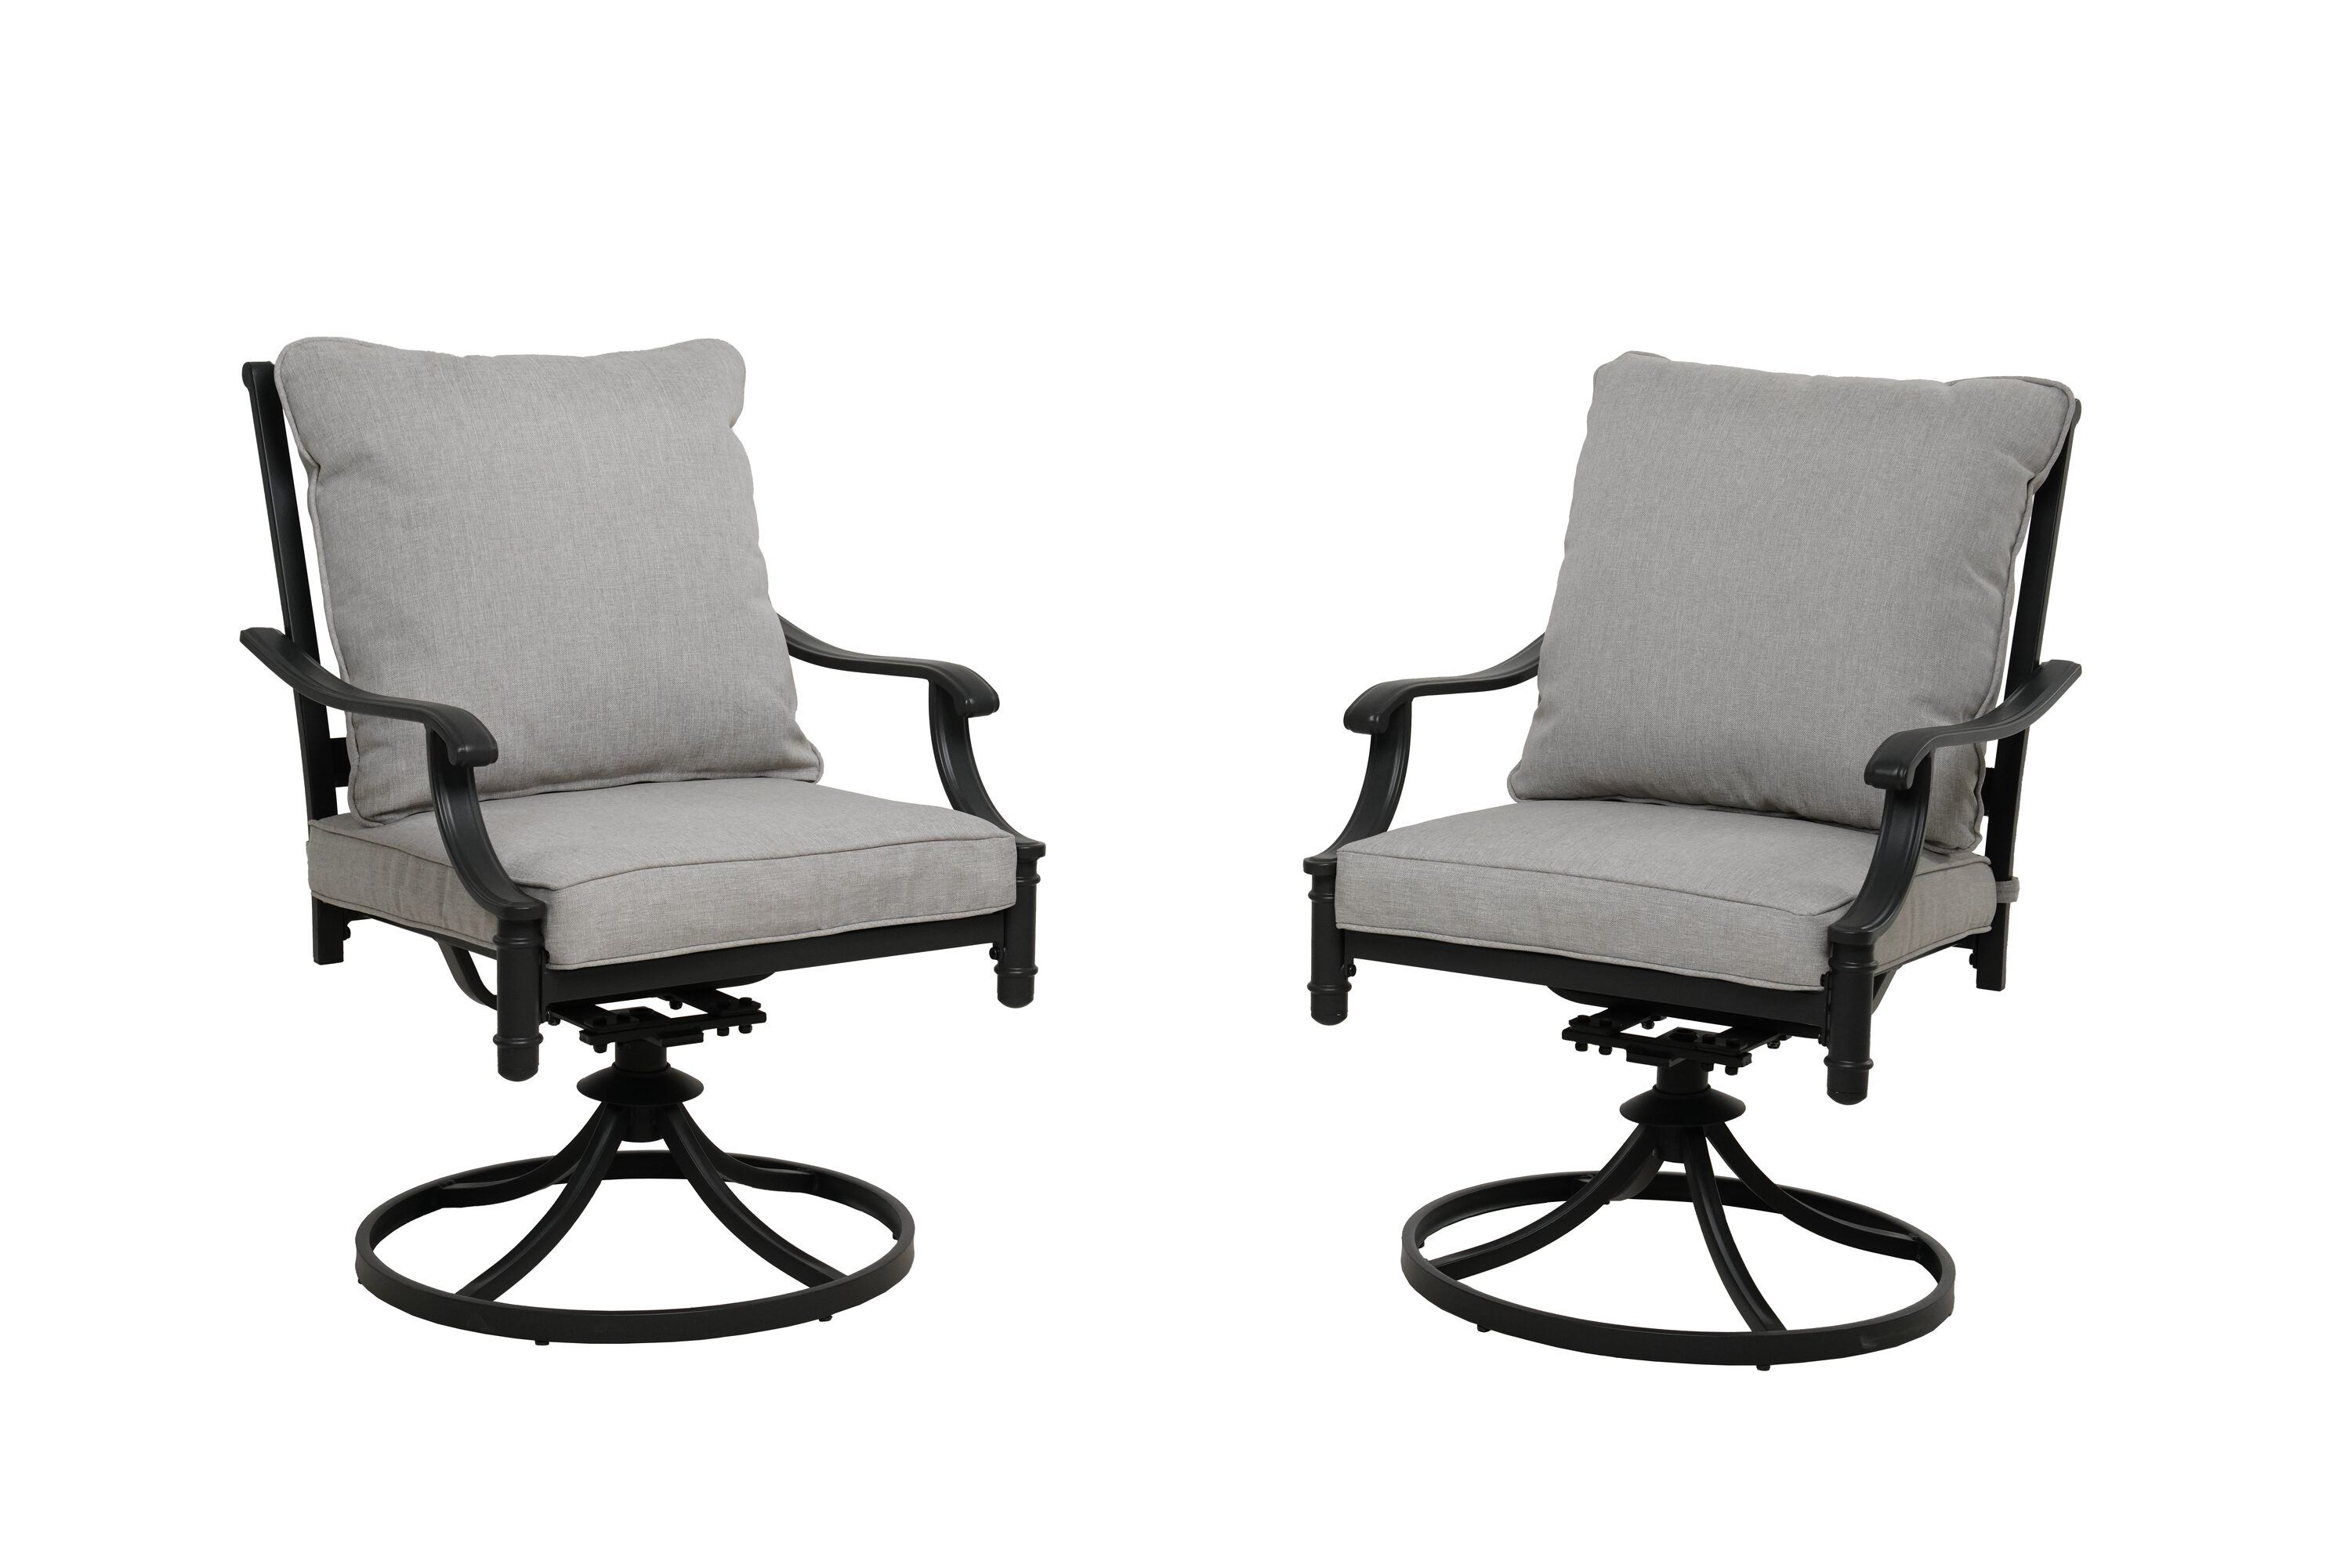 Allen + Roth Thomas Lake Set of 2 Gray Steel Frame Swivel Dining Chair(s) with Gray Cushioned Seat | LOS23006-SR01